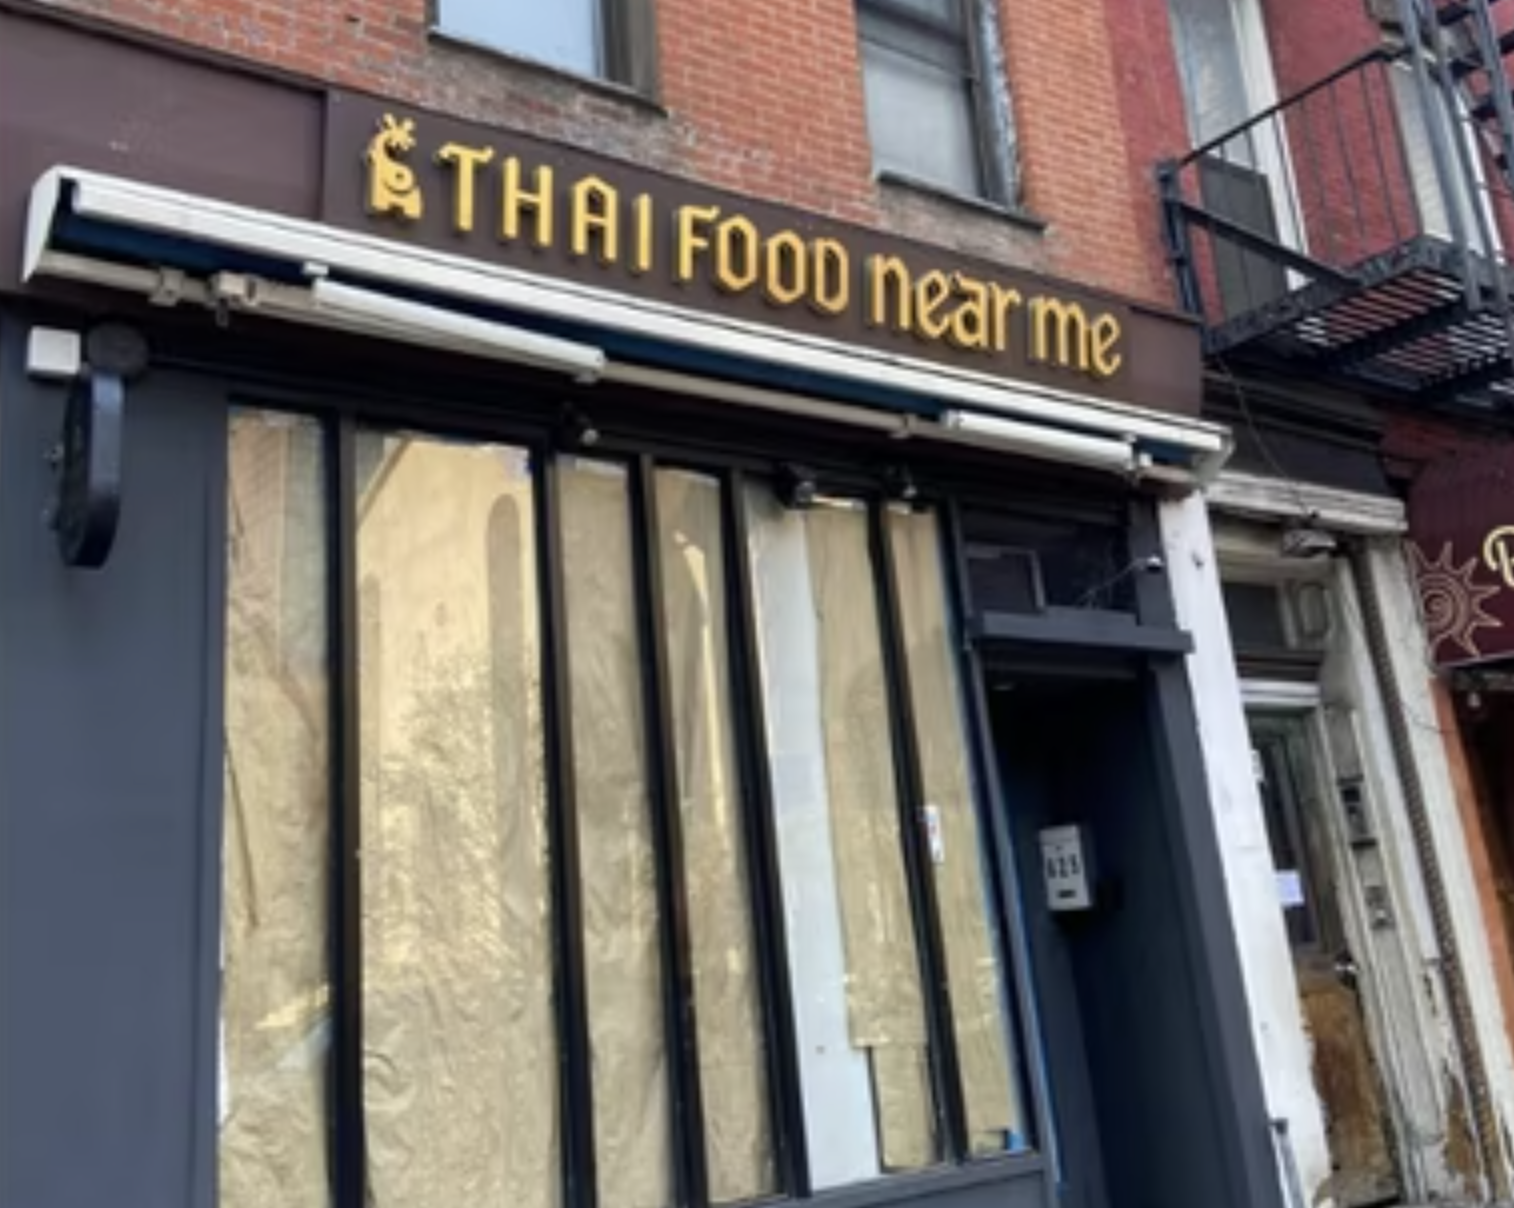 Where Eat Near Me This Restaurant Came Up With The Smartest Name—'Thai Food Near Me'